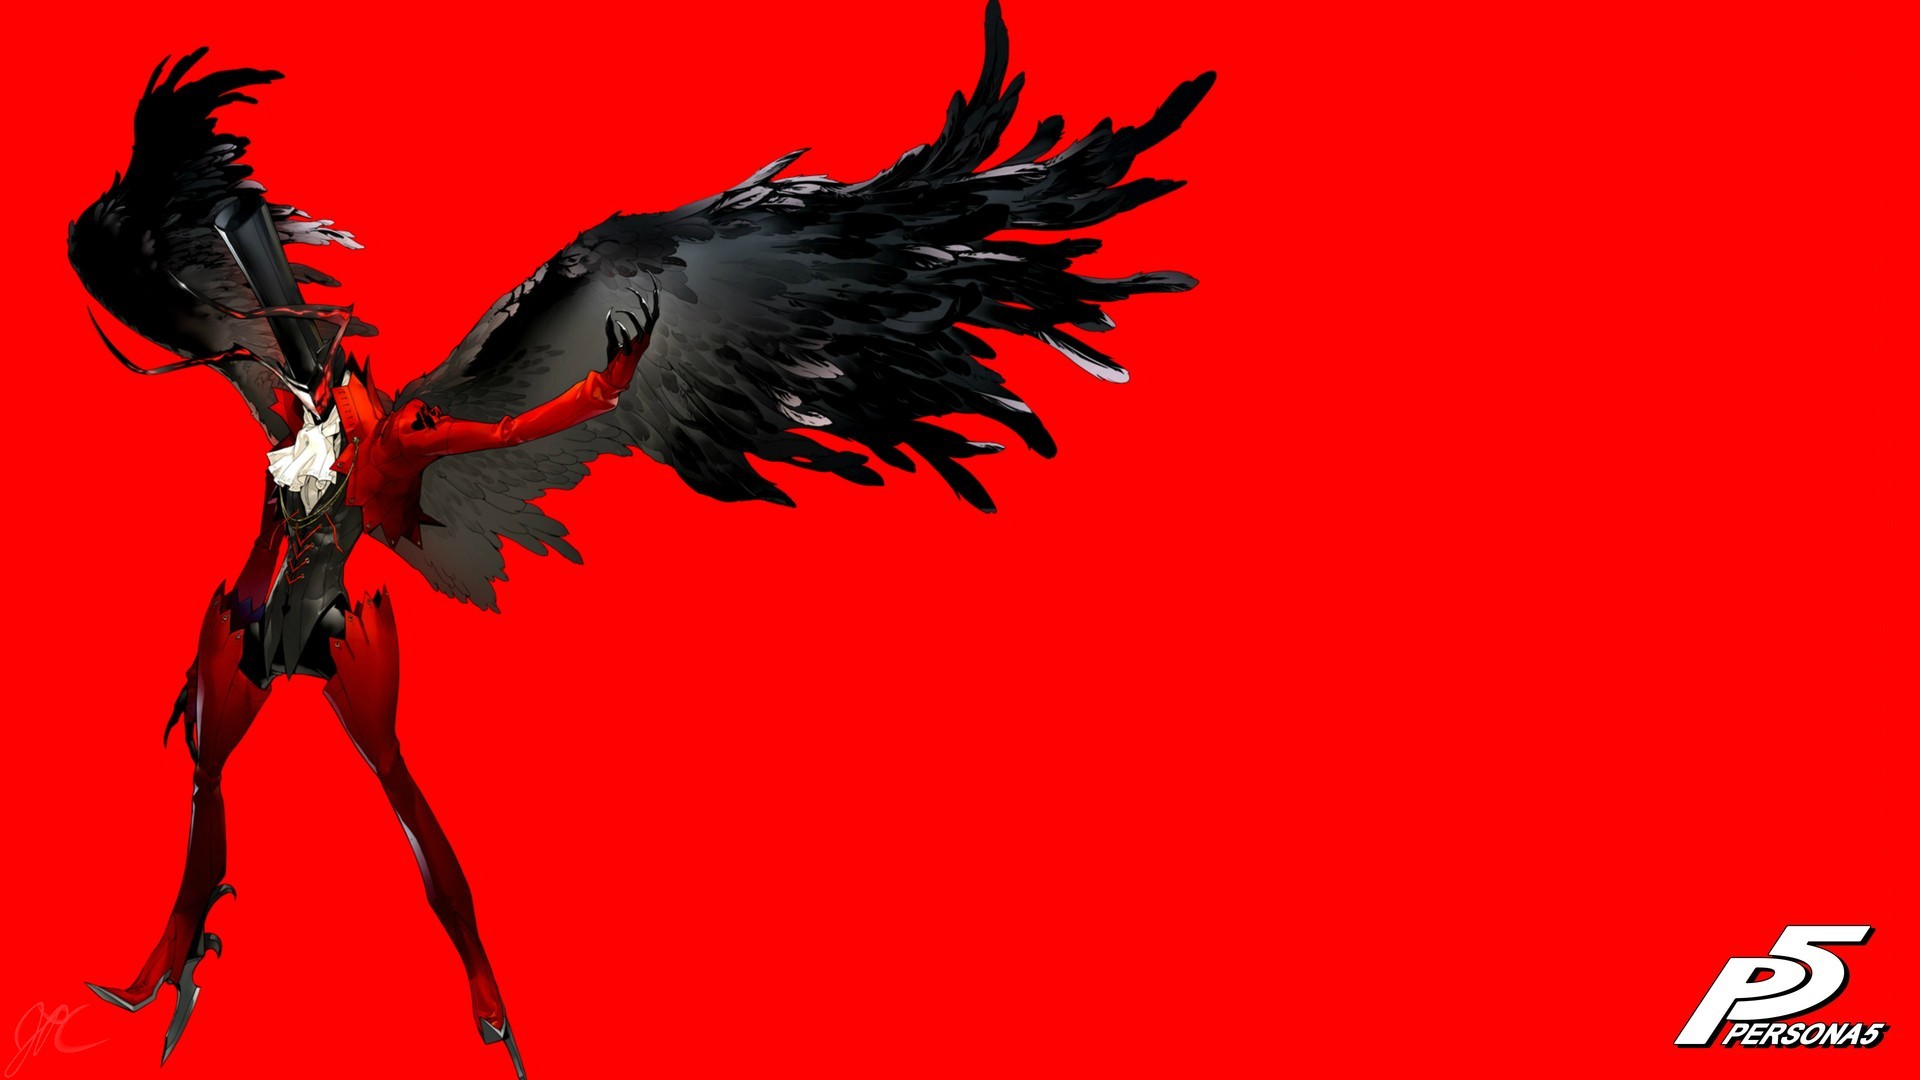 1920x1080 Wallpaper from Persona 5